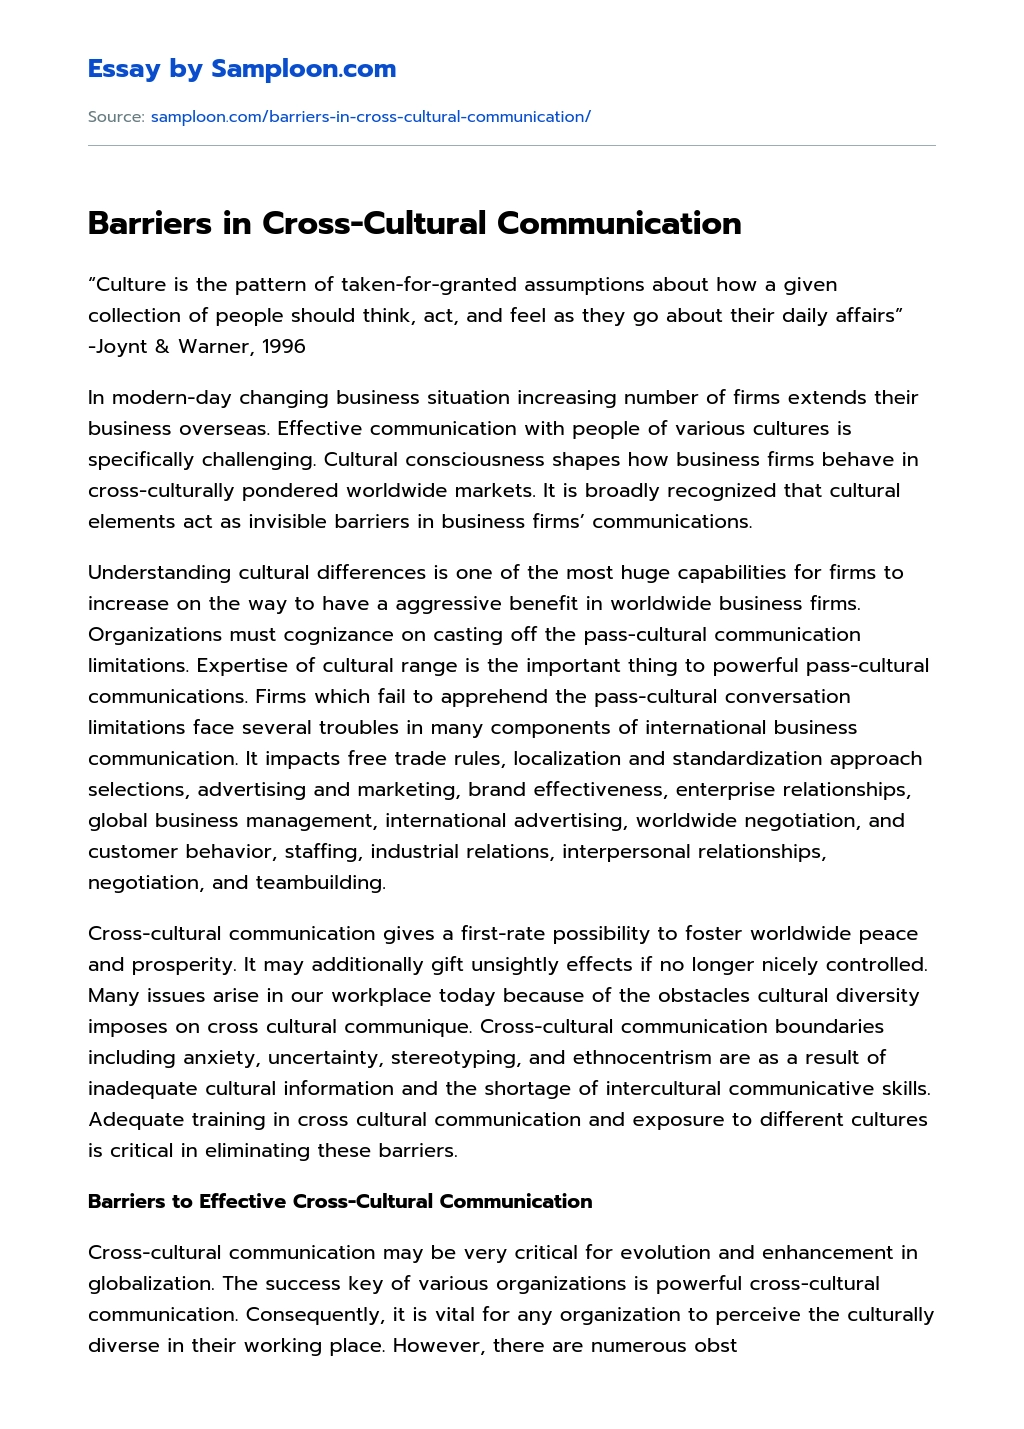 Barriers in Cross-Cultural Communication essay